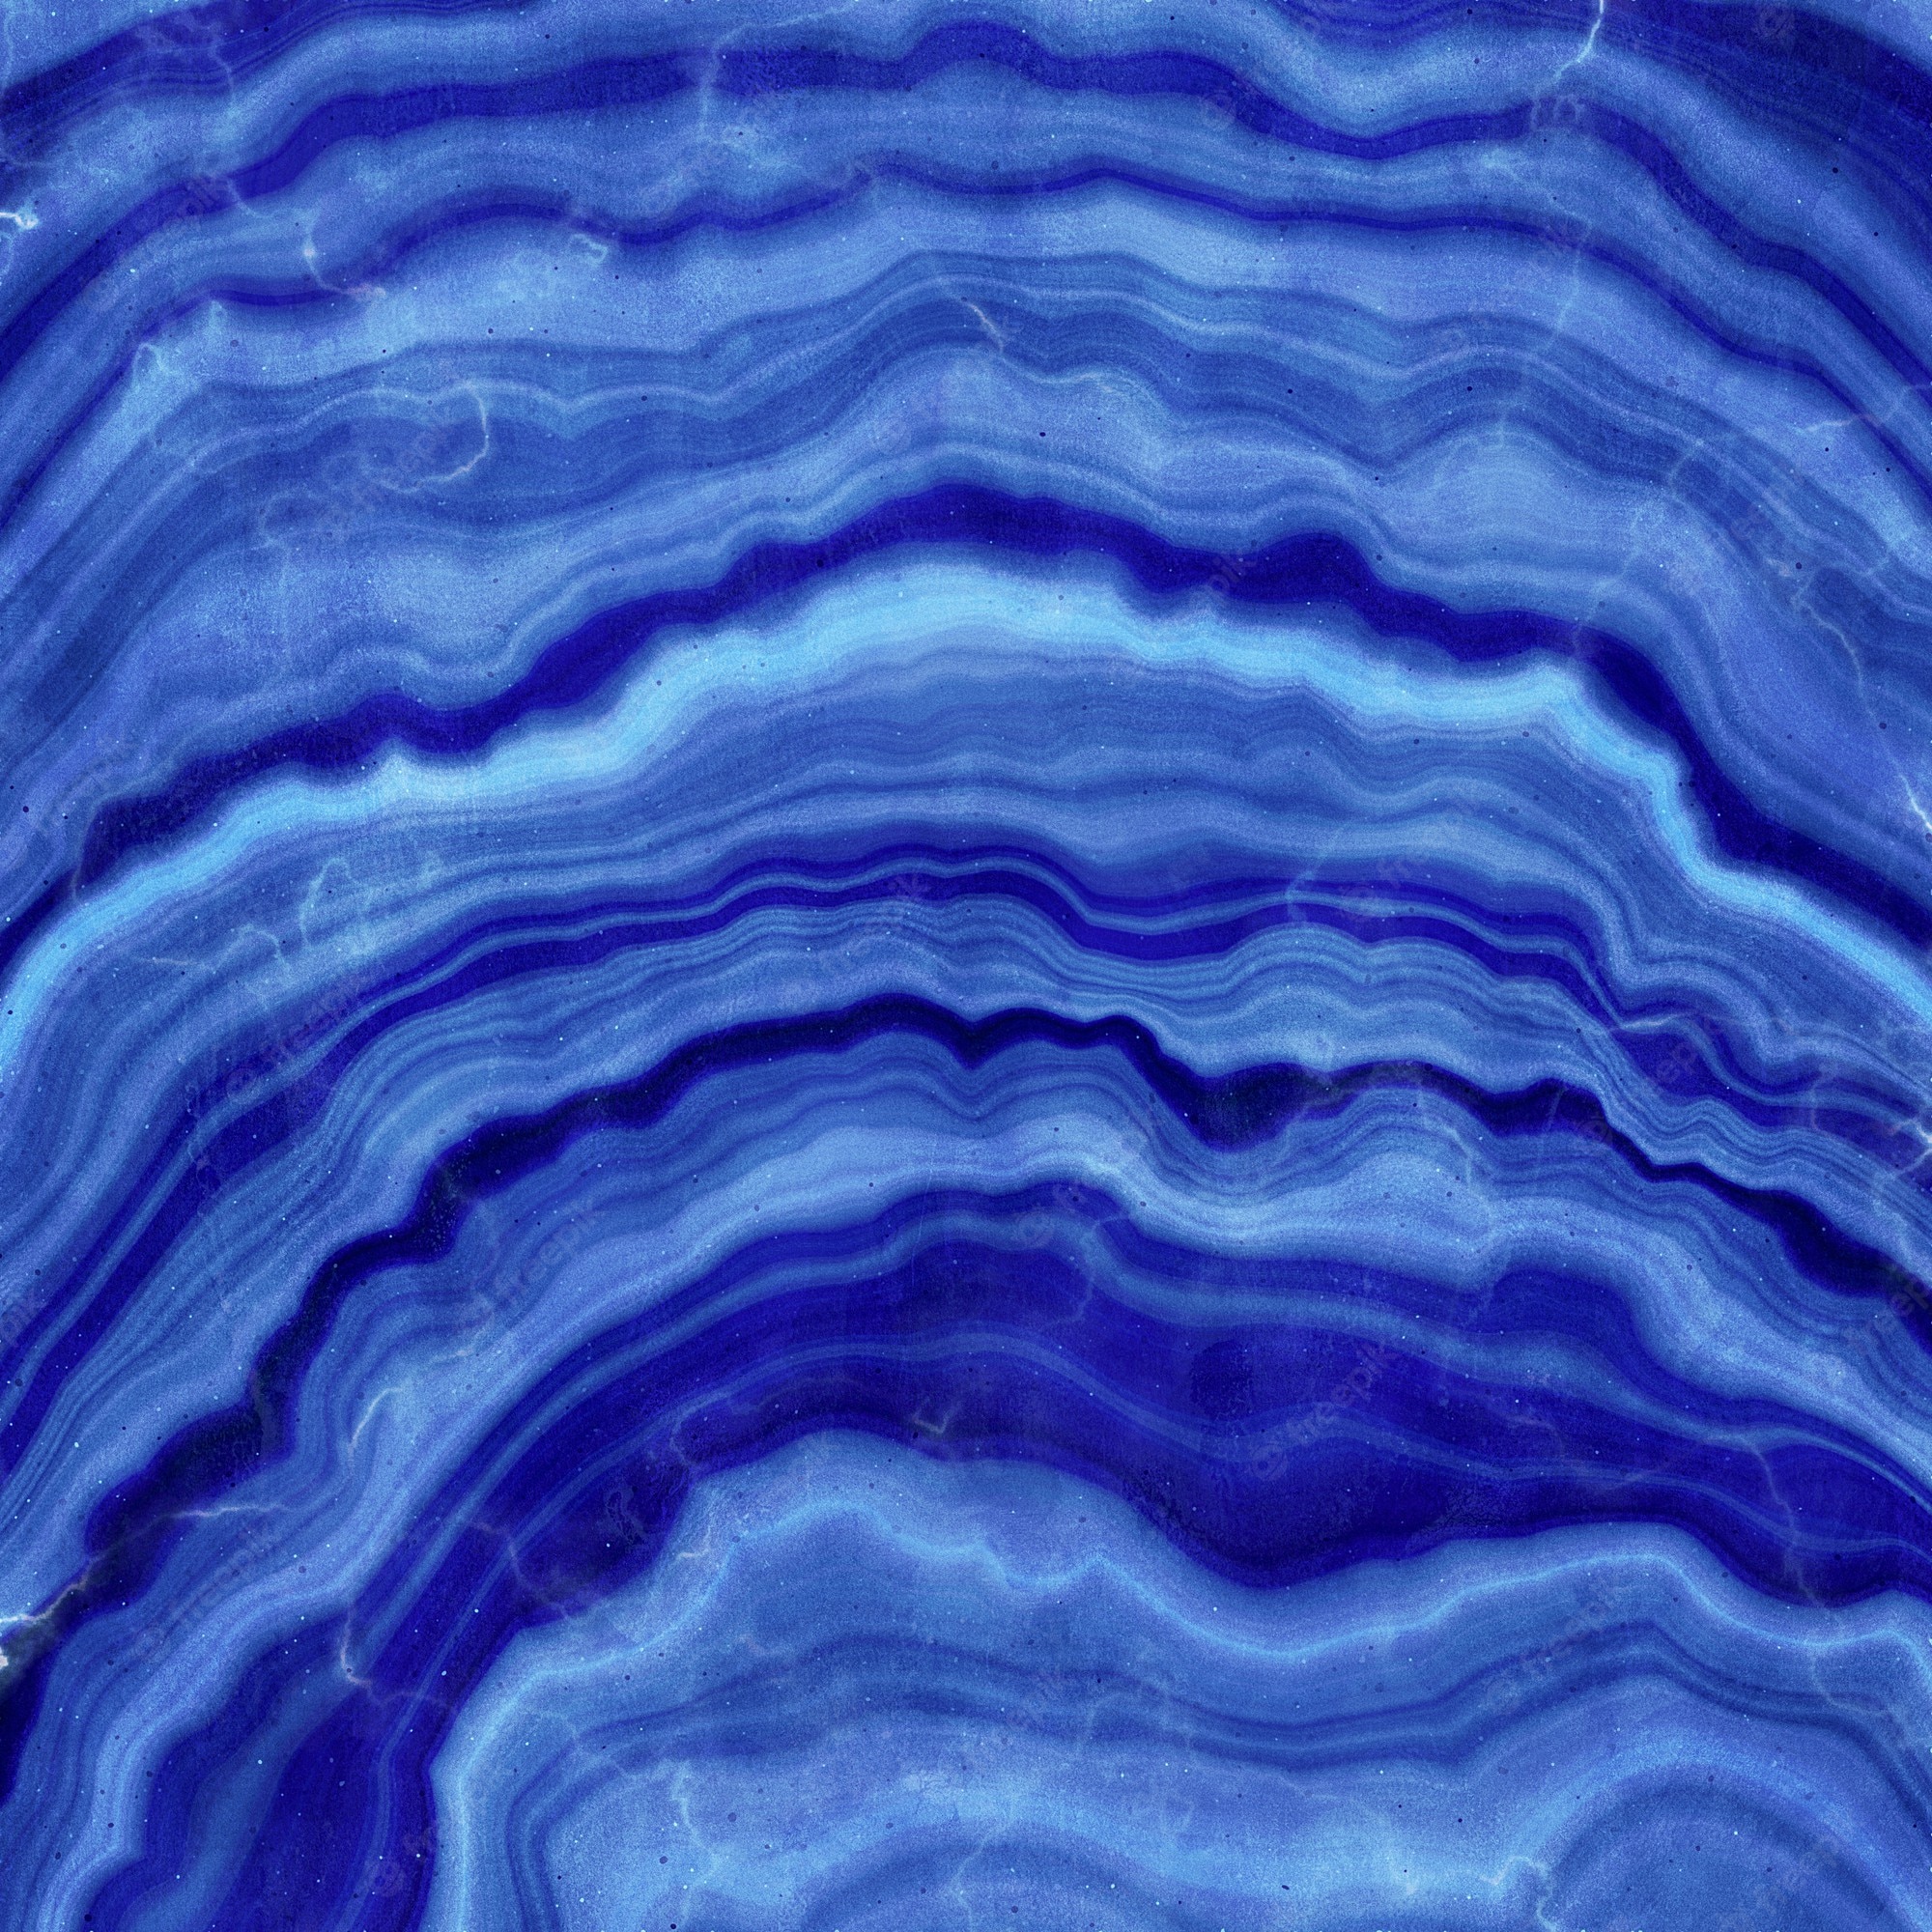 Agate Iphone Wallpapers